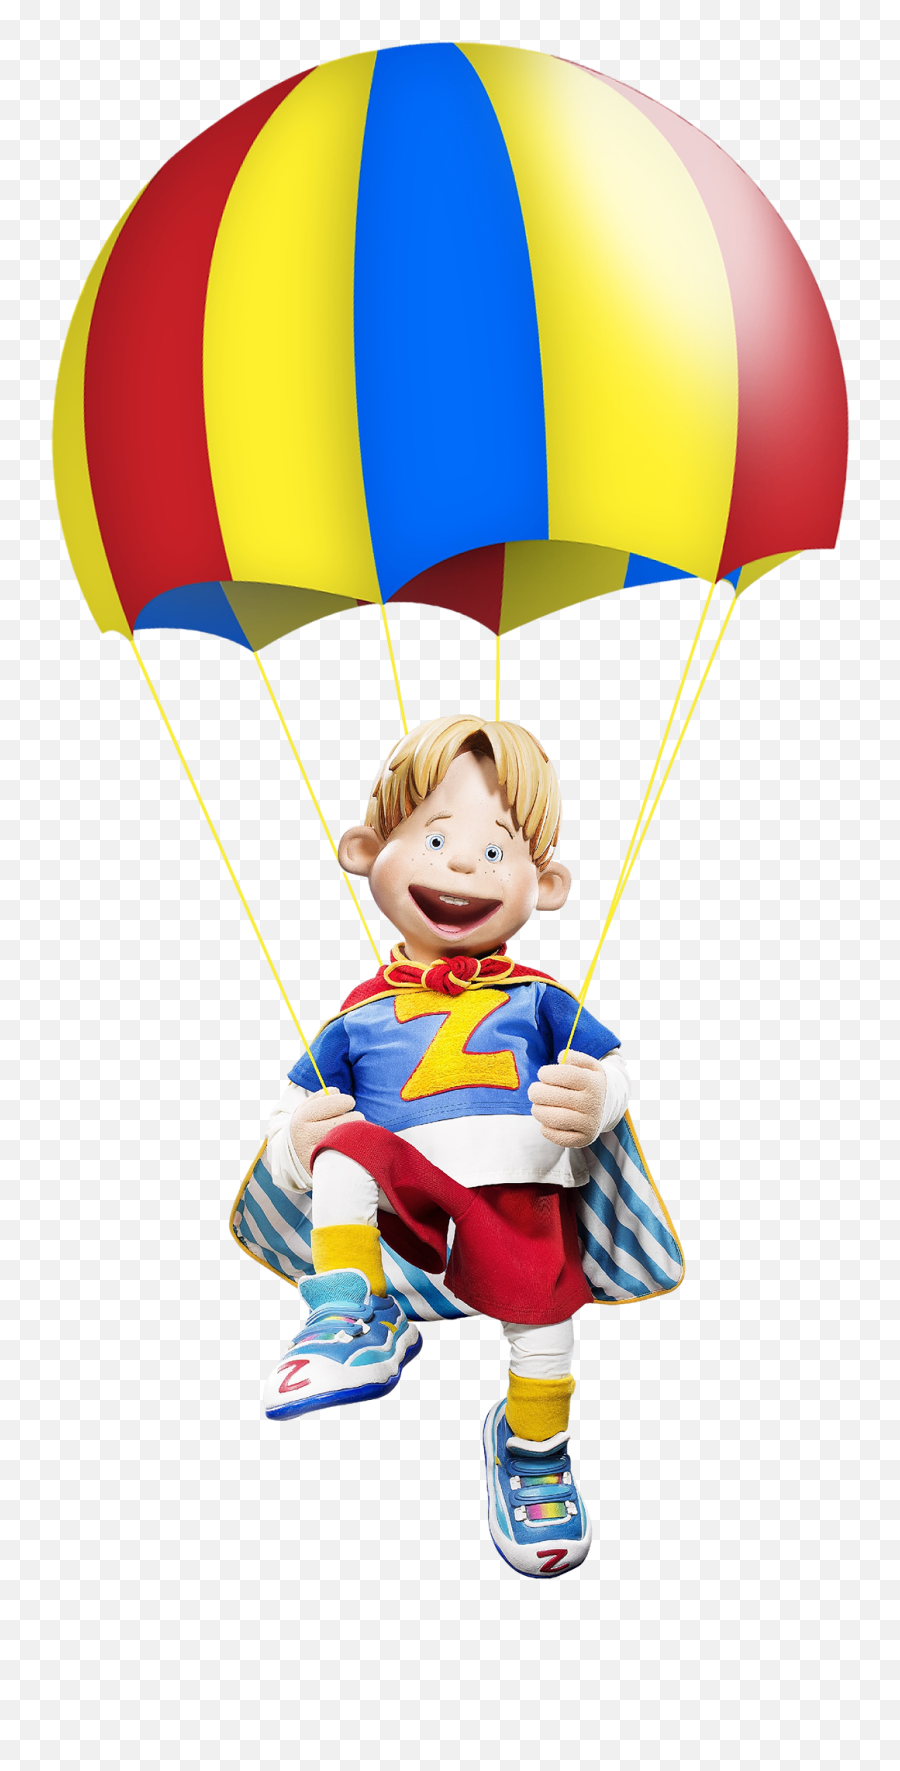 Download Lazytown Ziggy With Parachute - Ziggy Png Lazy Town,Parachute Png